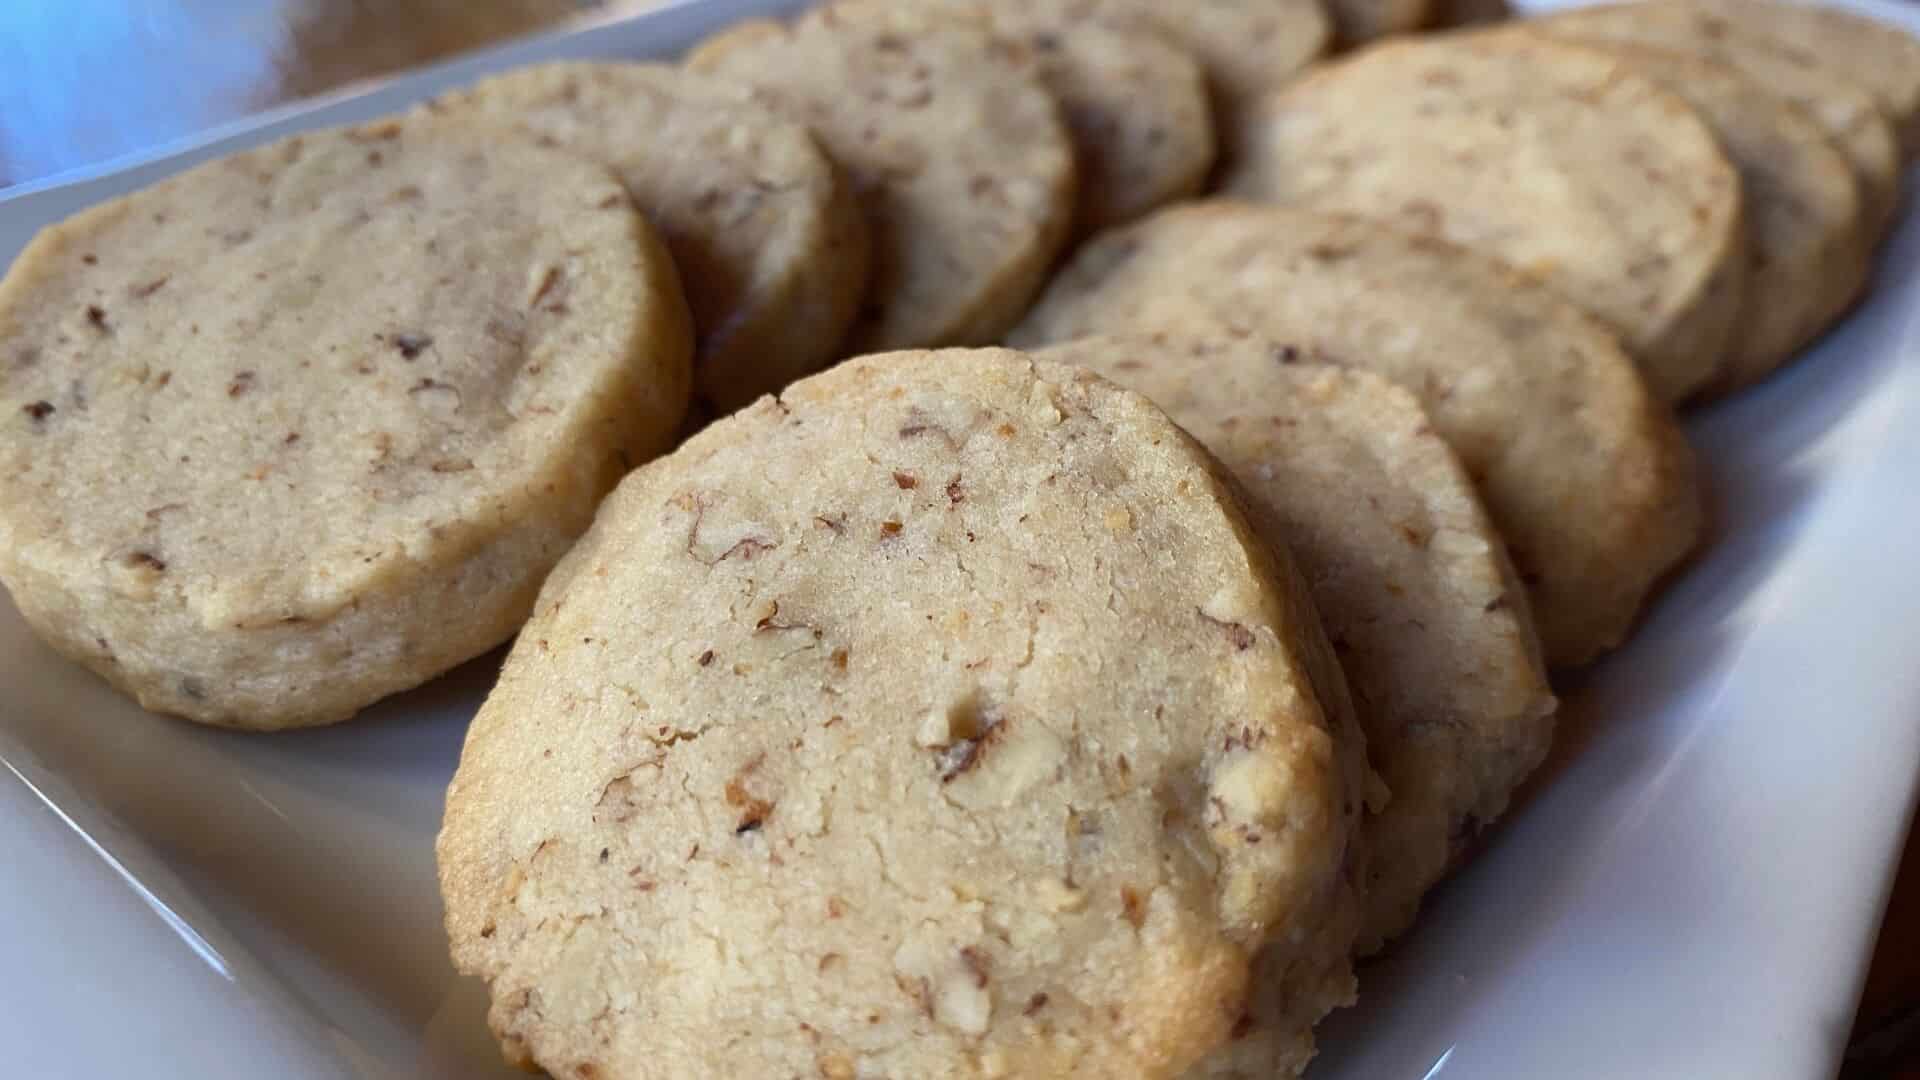 A white tray of thickly sliced round cookies with bits of pecans in them, lightly browned around the edges.